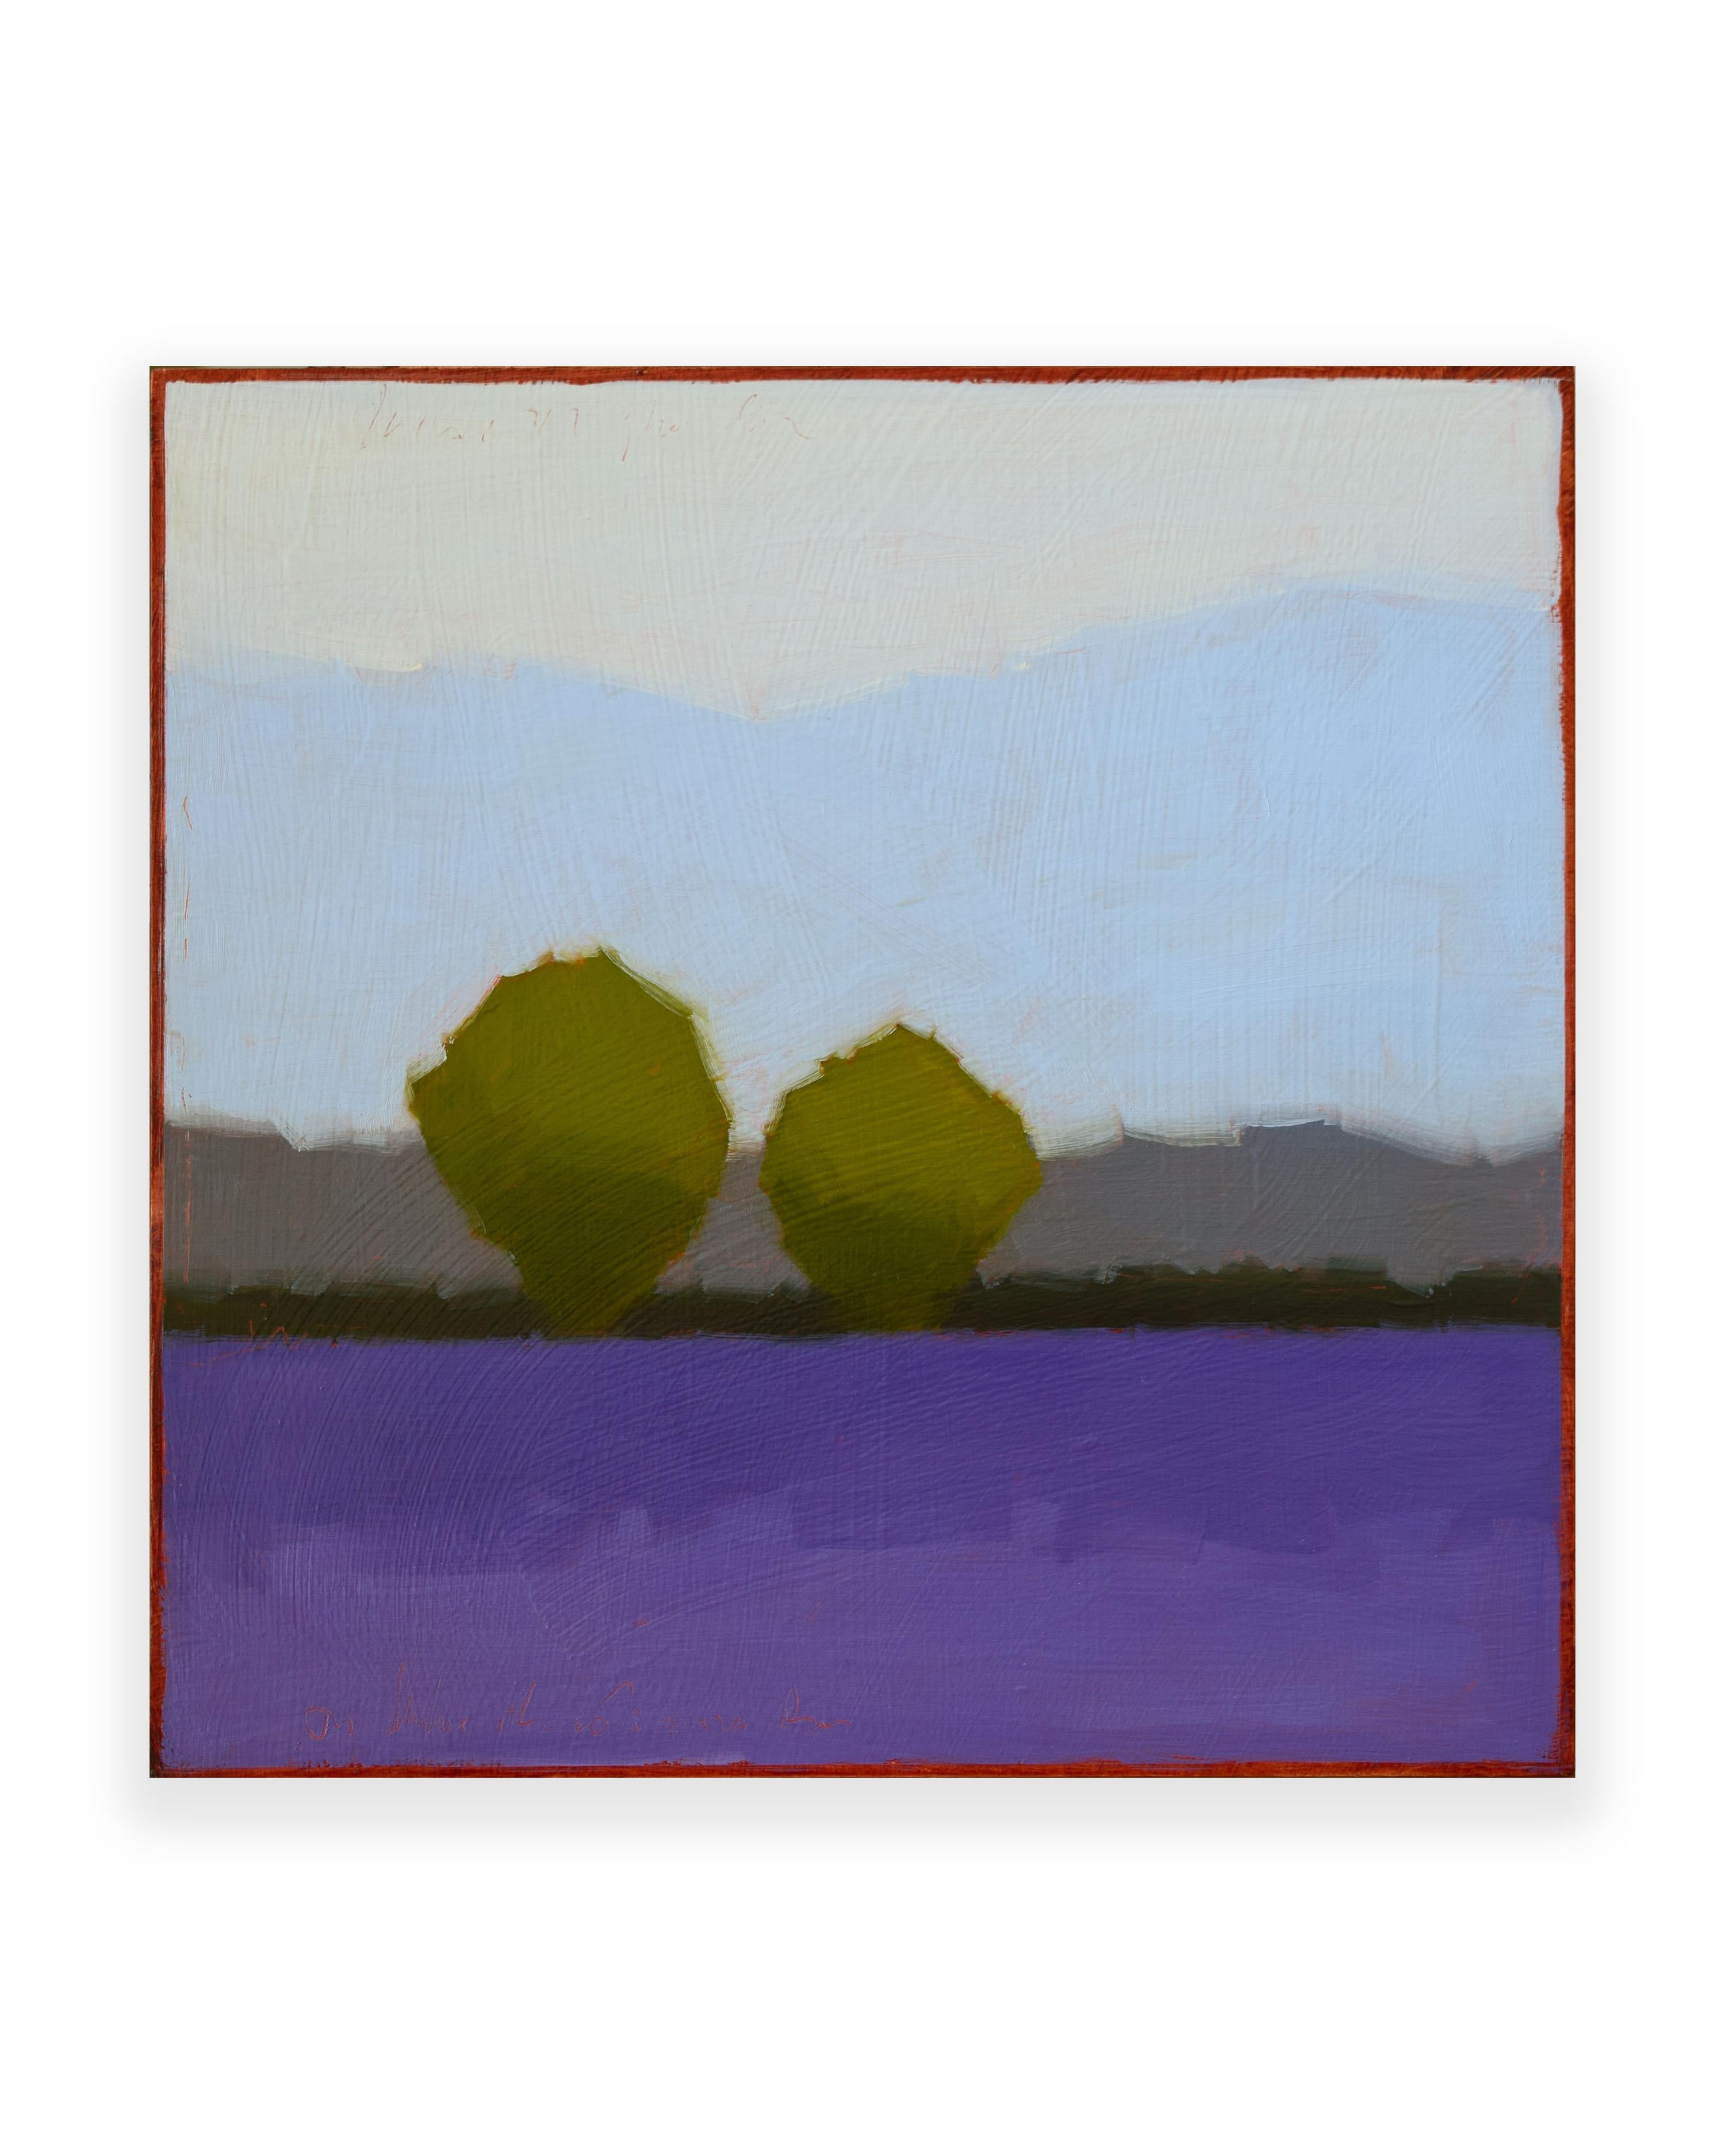 Two Olive Trees (Color Field Painting of a Rural Landscape by Tracy Helgeson) 1